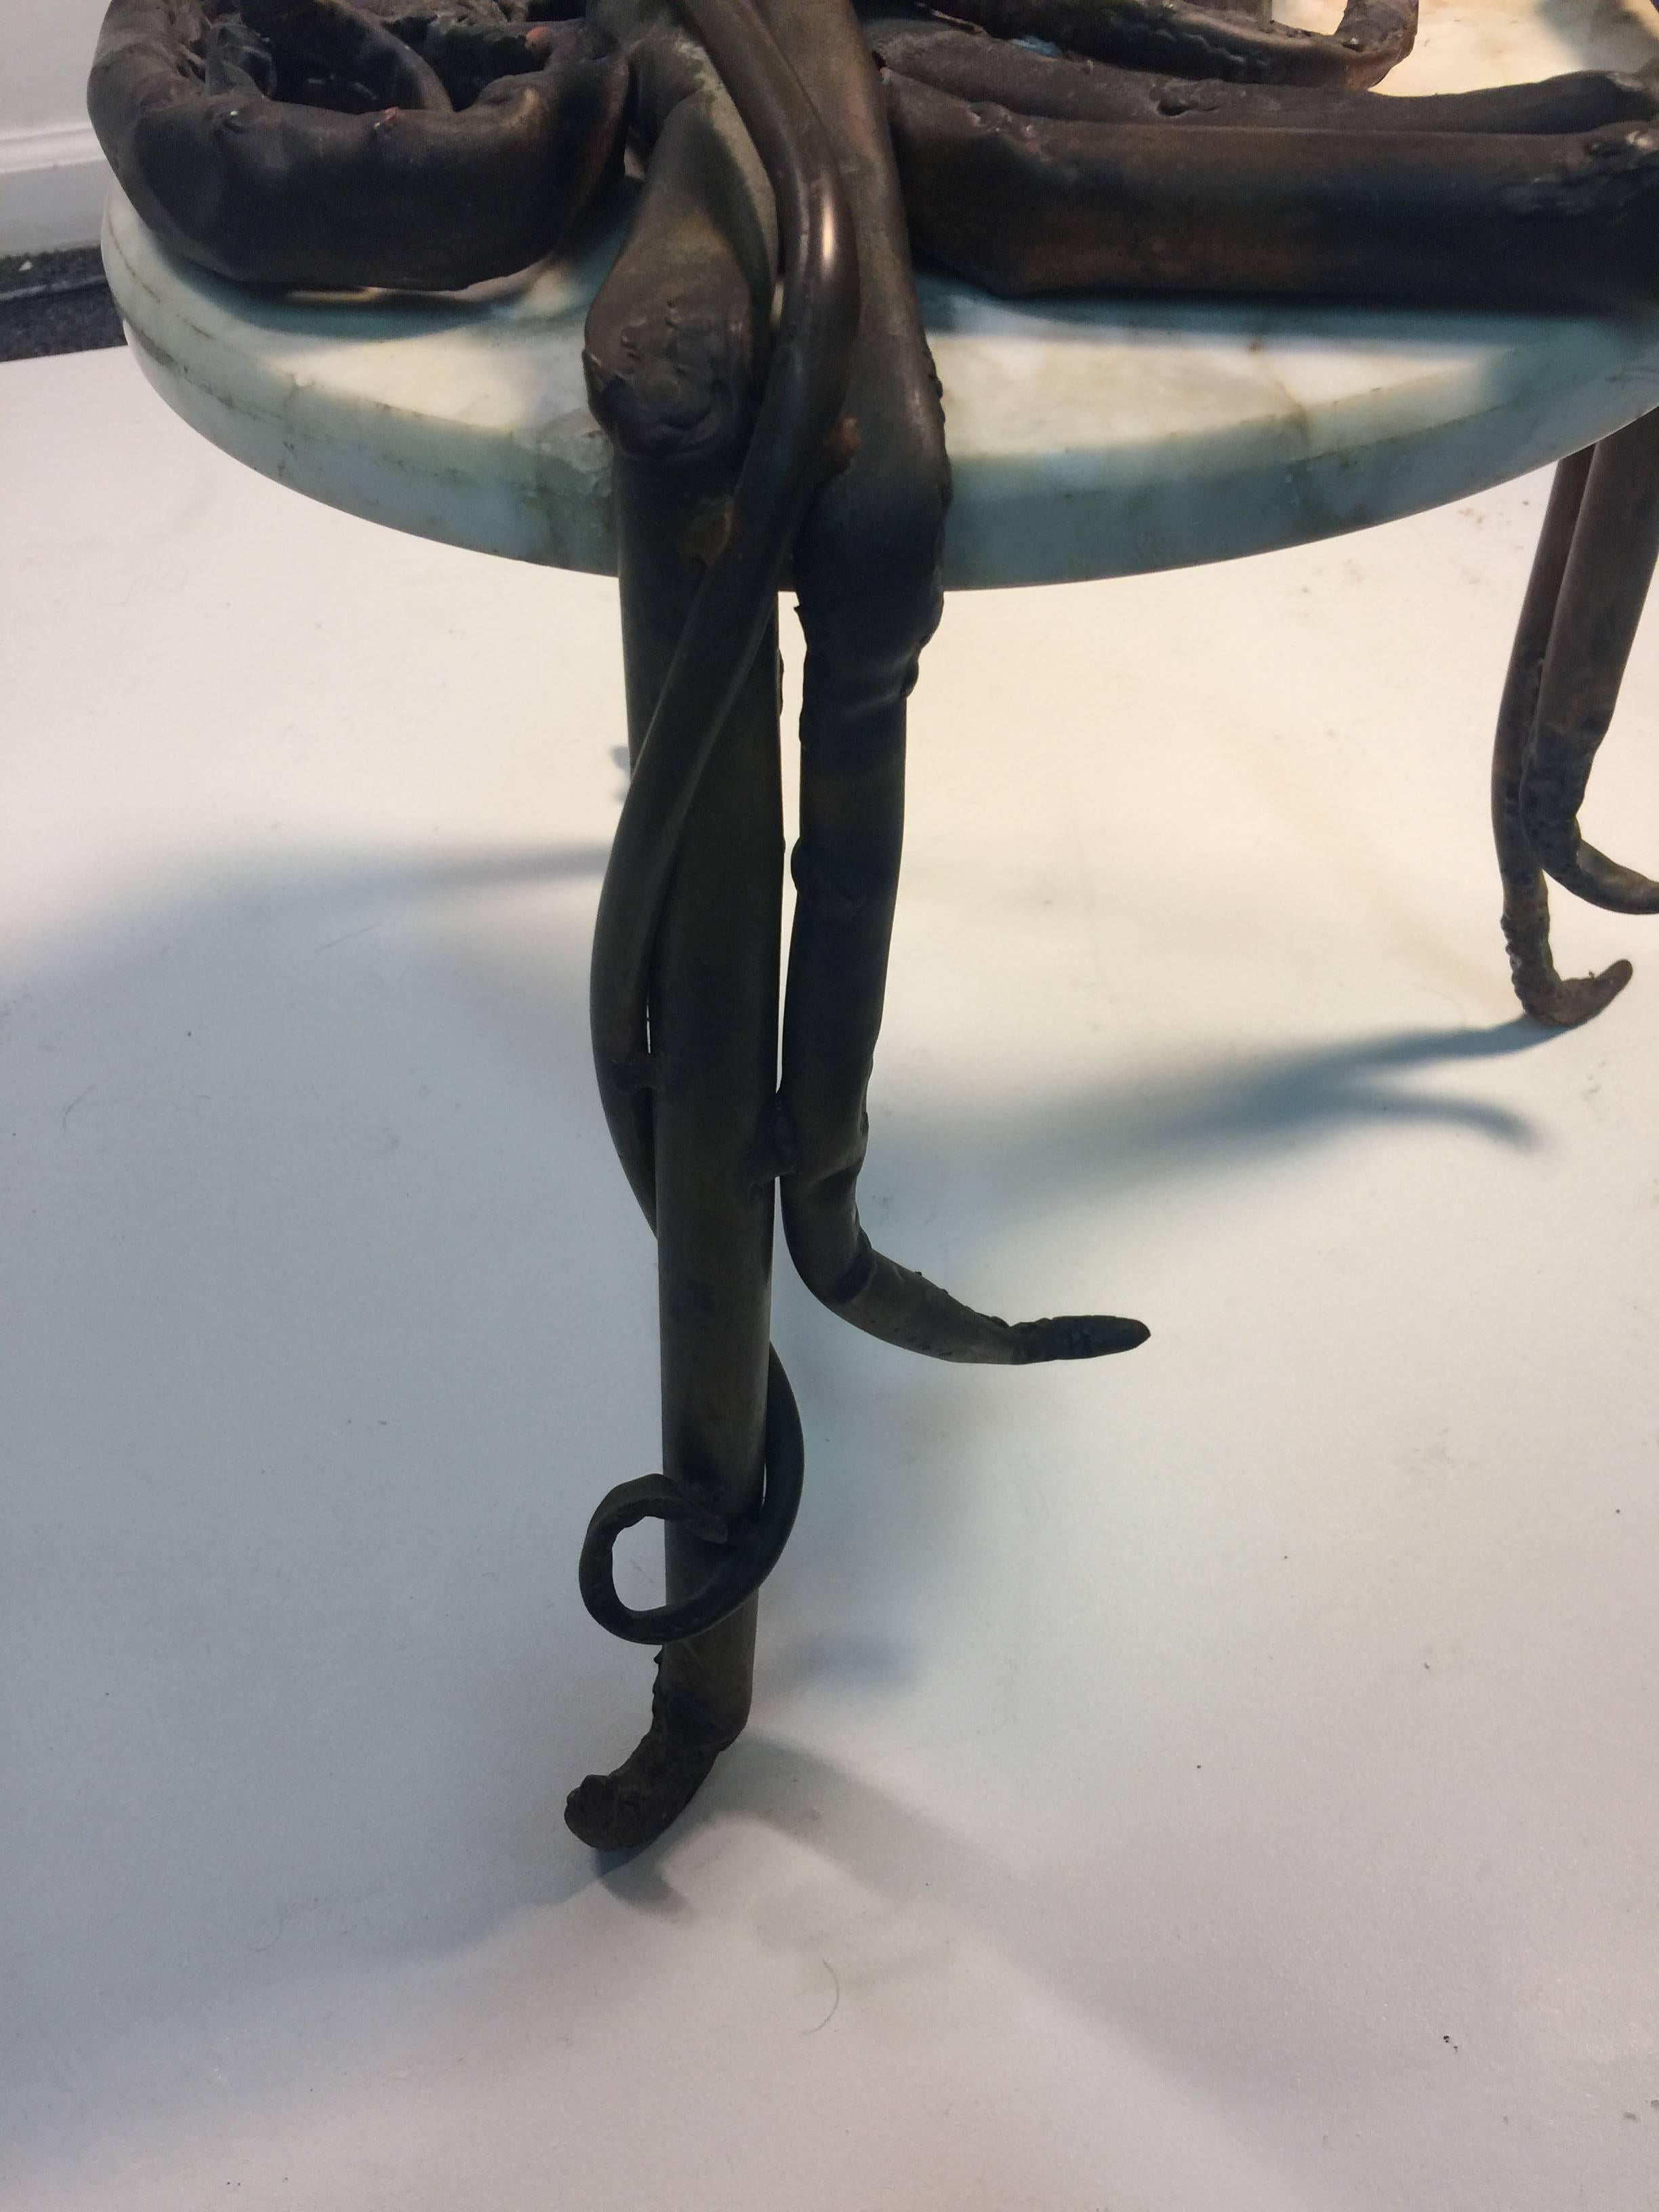 Forged Unique Italian Brutalist Metal Octopus Table For Sale